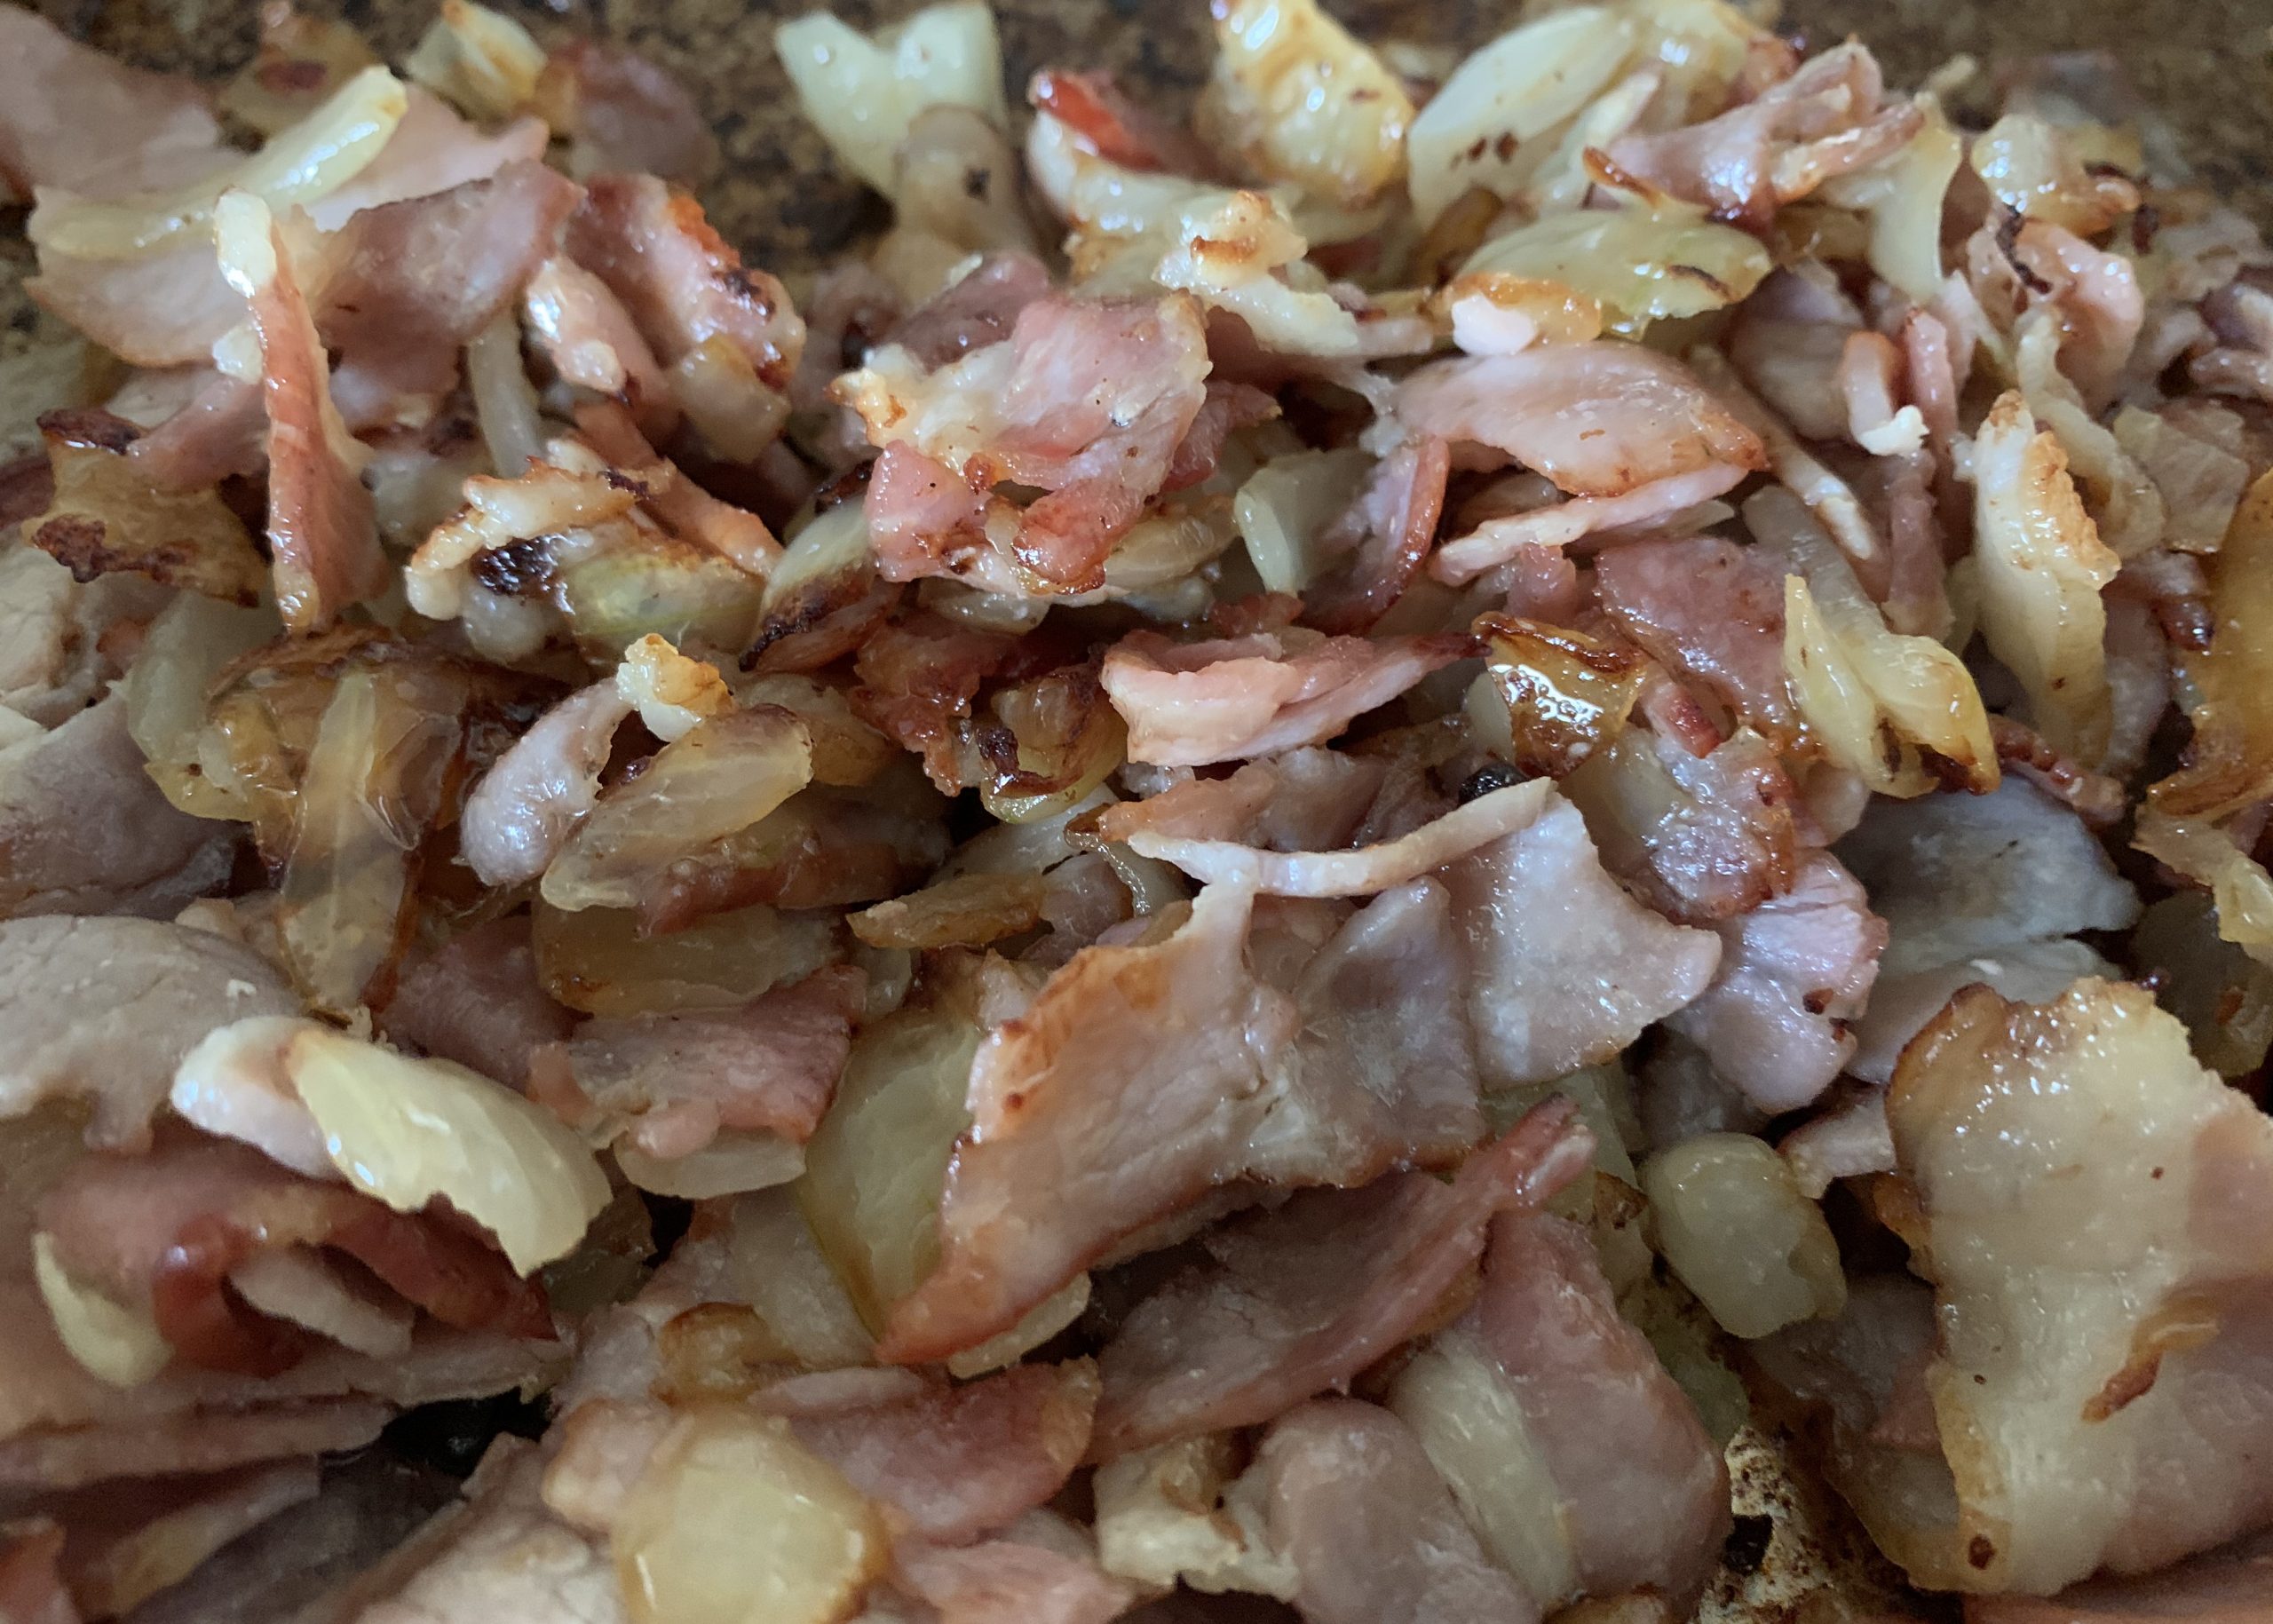 Fried bacon and onion for a gluten free quiche Lorraine